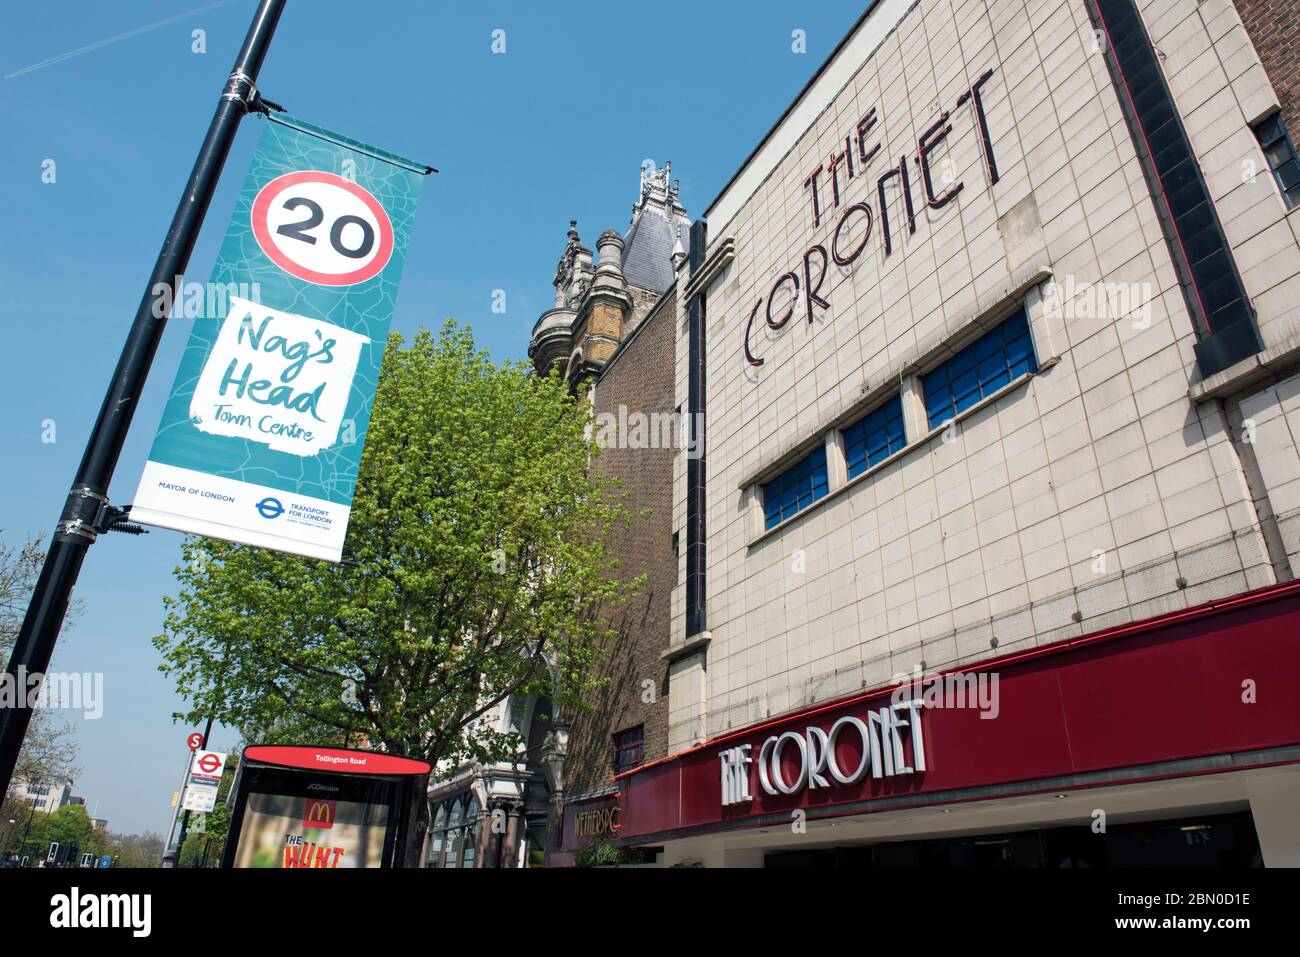 The Coronet Public House with 20 mph sign and Nags Head Town Centre banner, Holloway Road, London Borough of Islington, England Britain UK Stock Photo